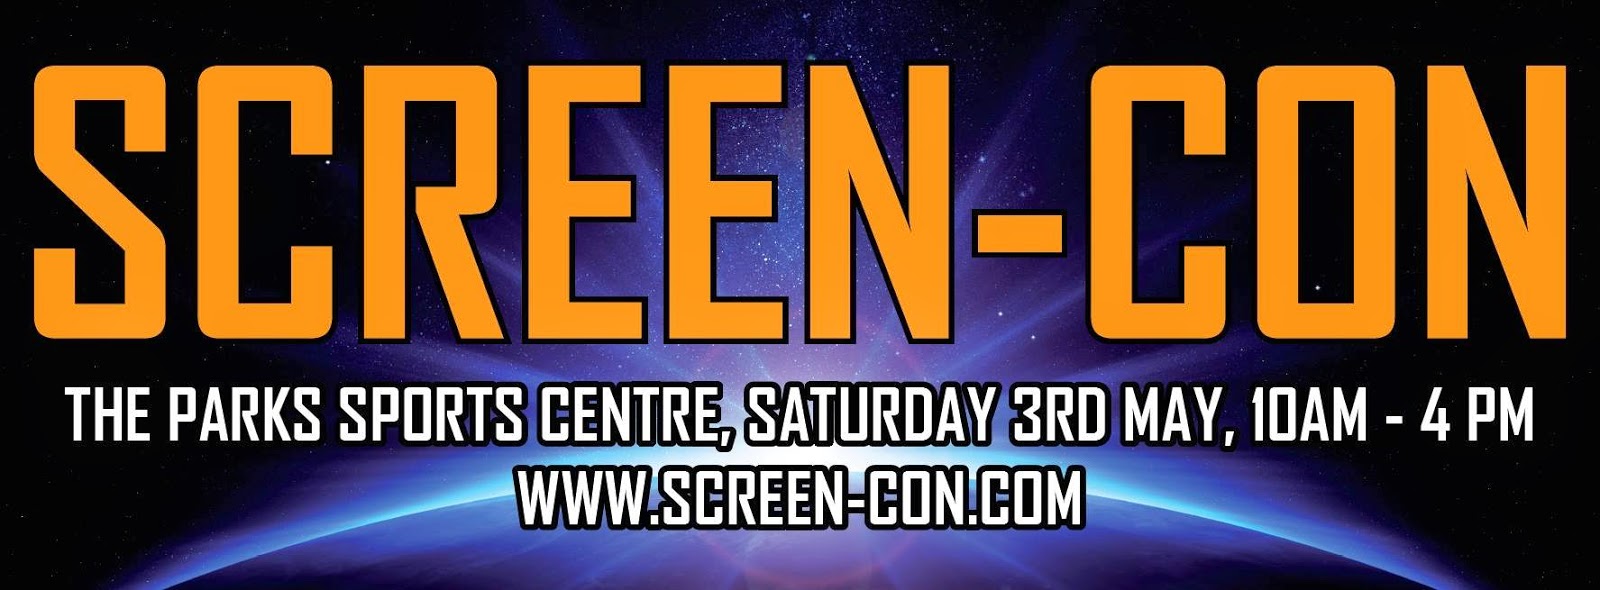 Screen-Con - Submit questions for Julian Glover, David Warner and more for @screencon